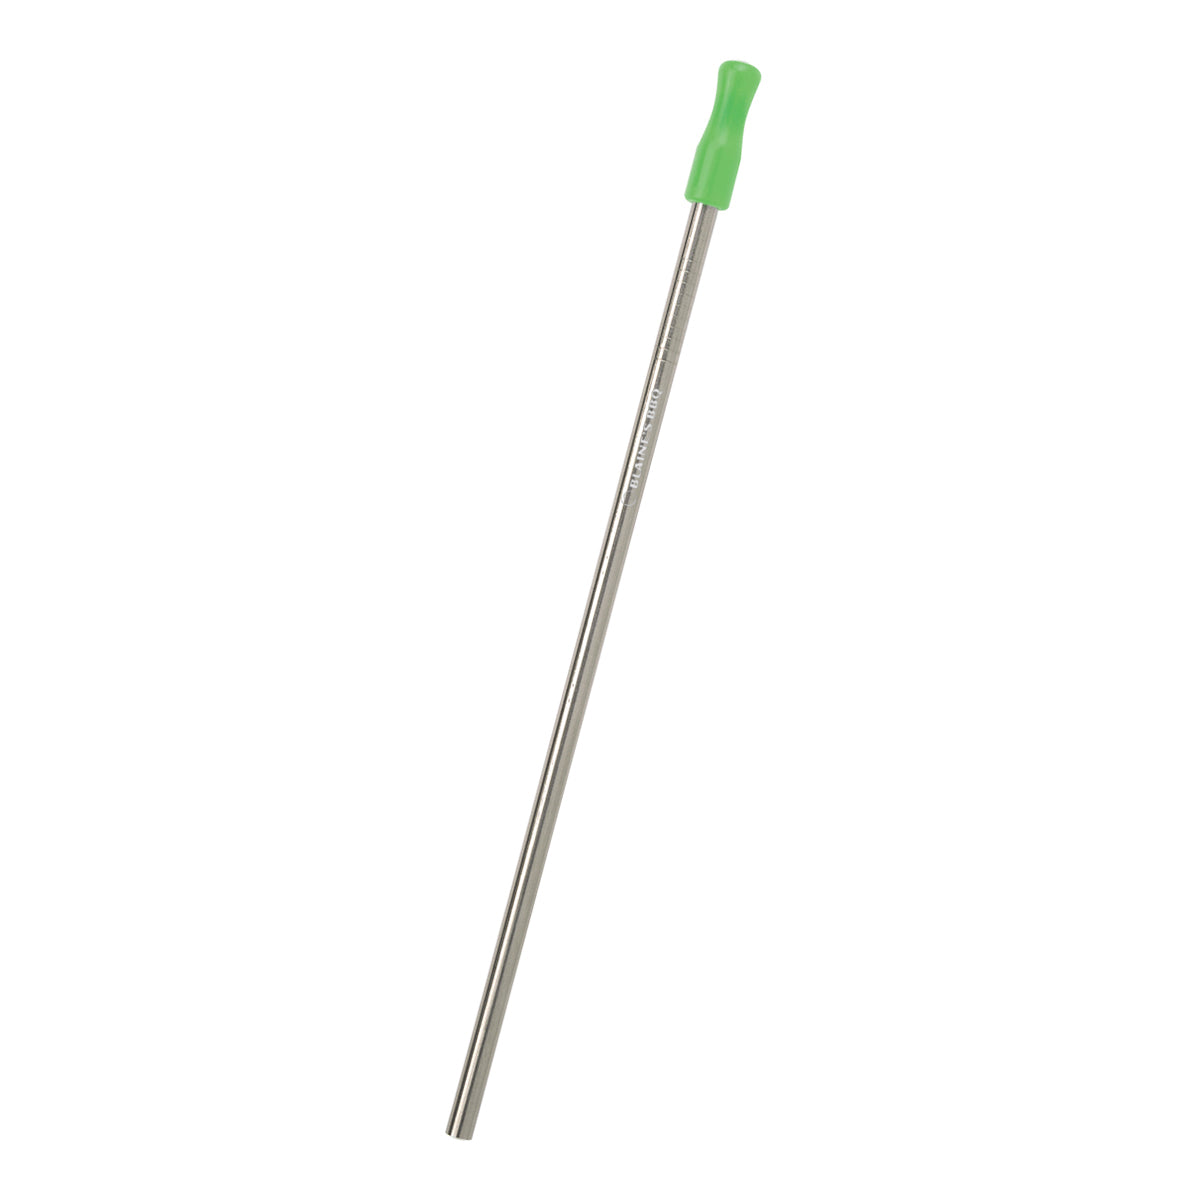 Customizable Stainless Steel Straw Kit with Cotton Pouch in green.